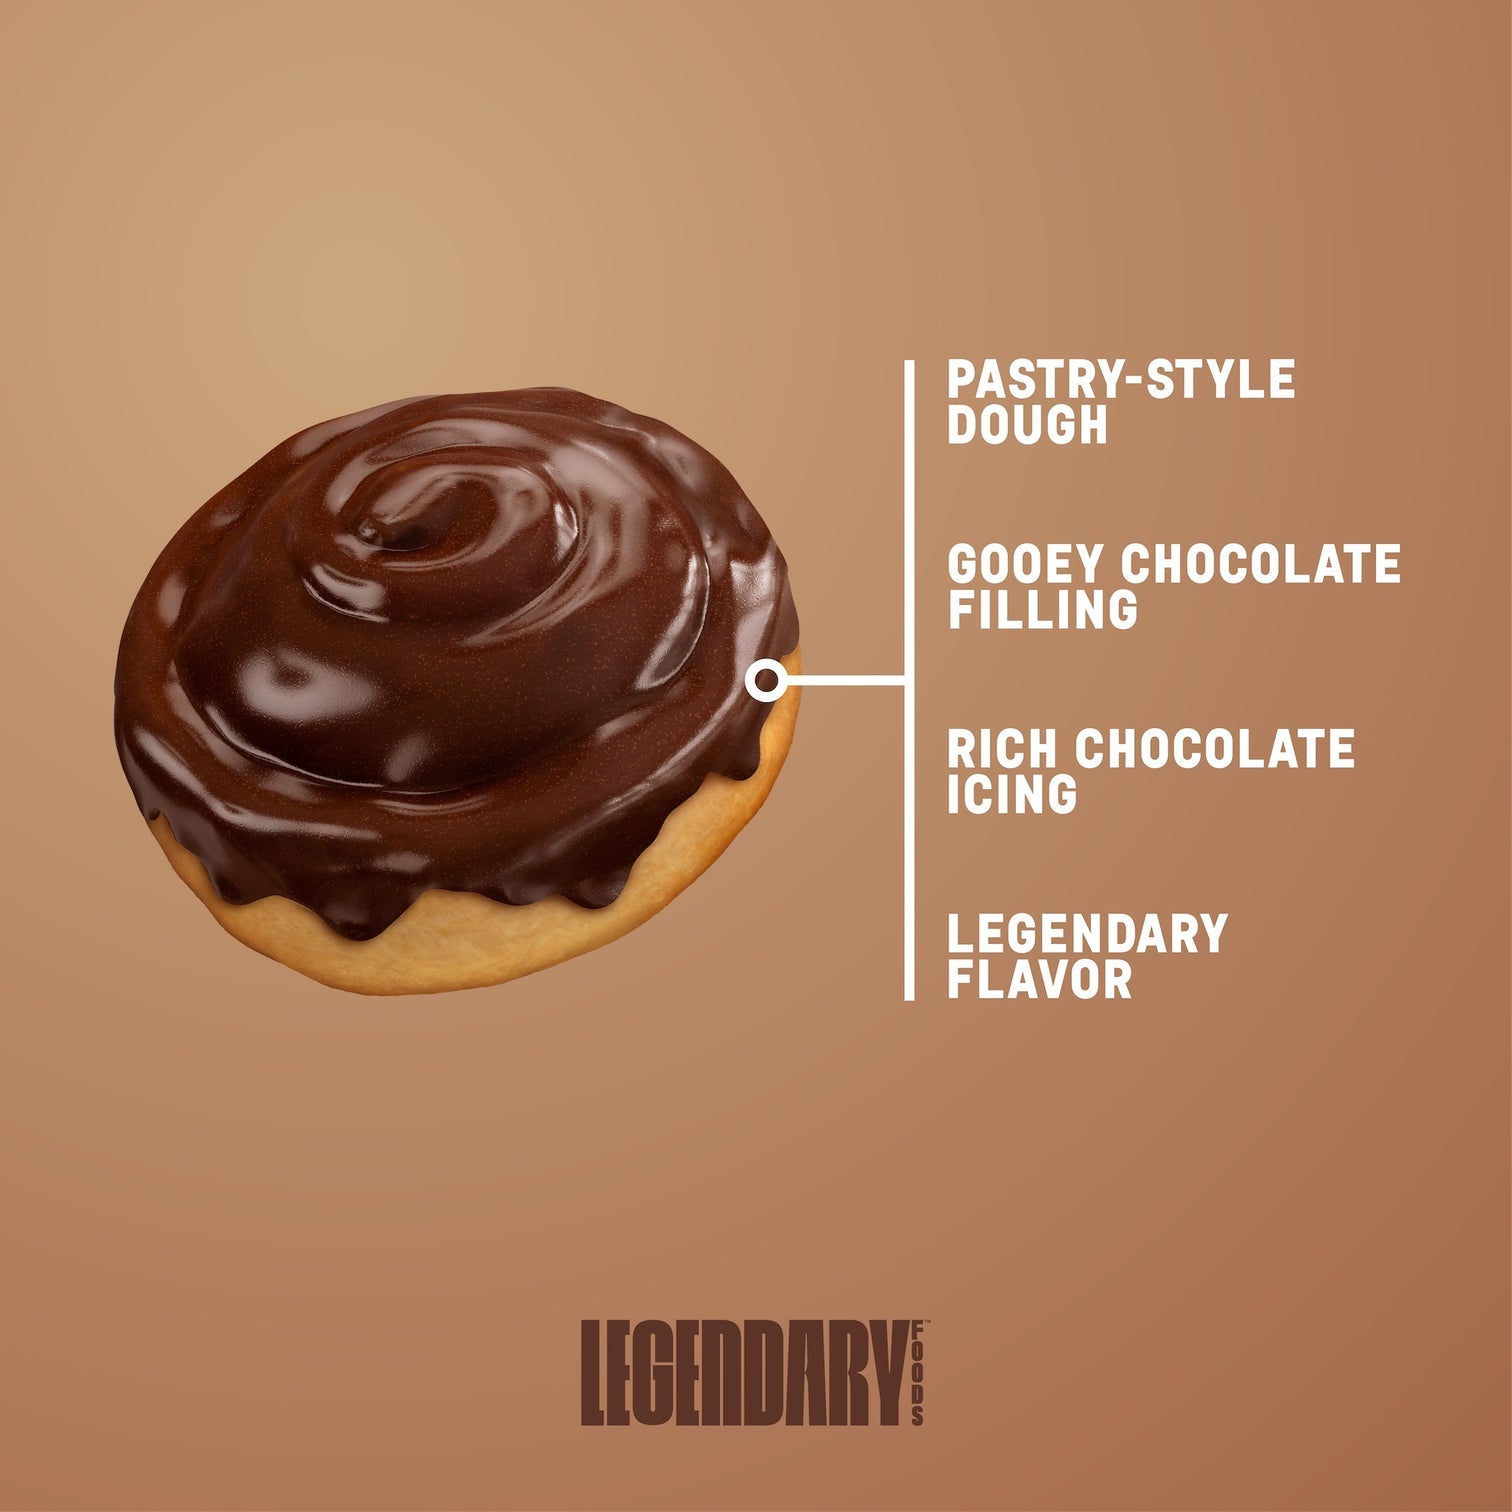 Protein Sweet Roll by Legendary Foods - Chocolate - High-quality Cakes & Cookies by Legendary Foods at 